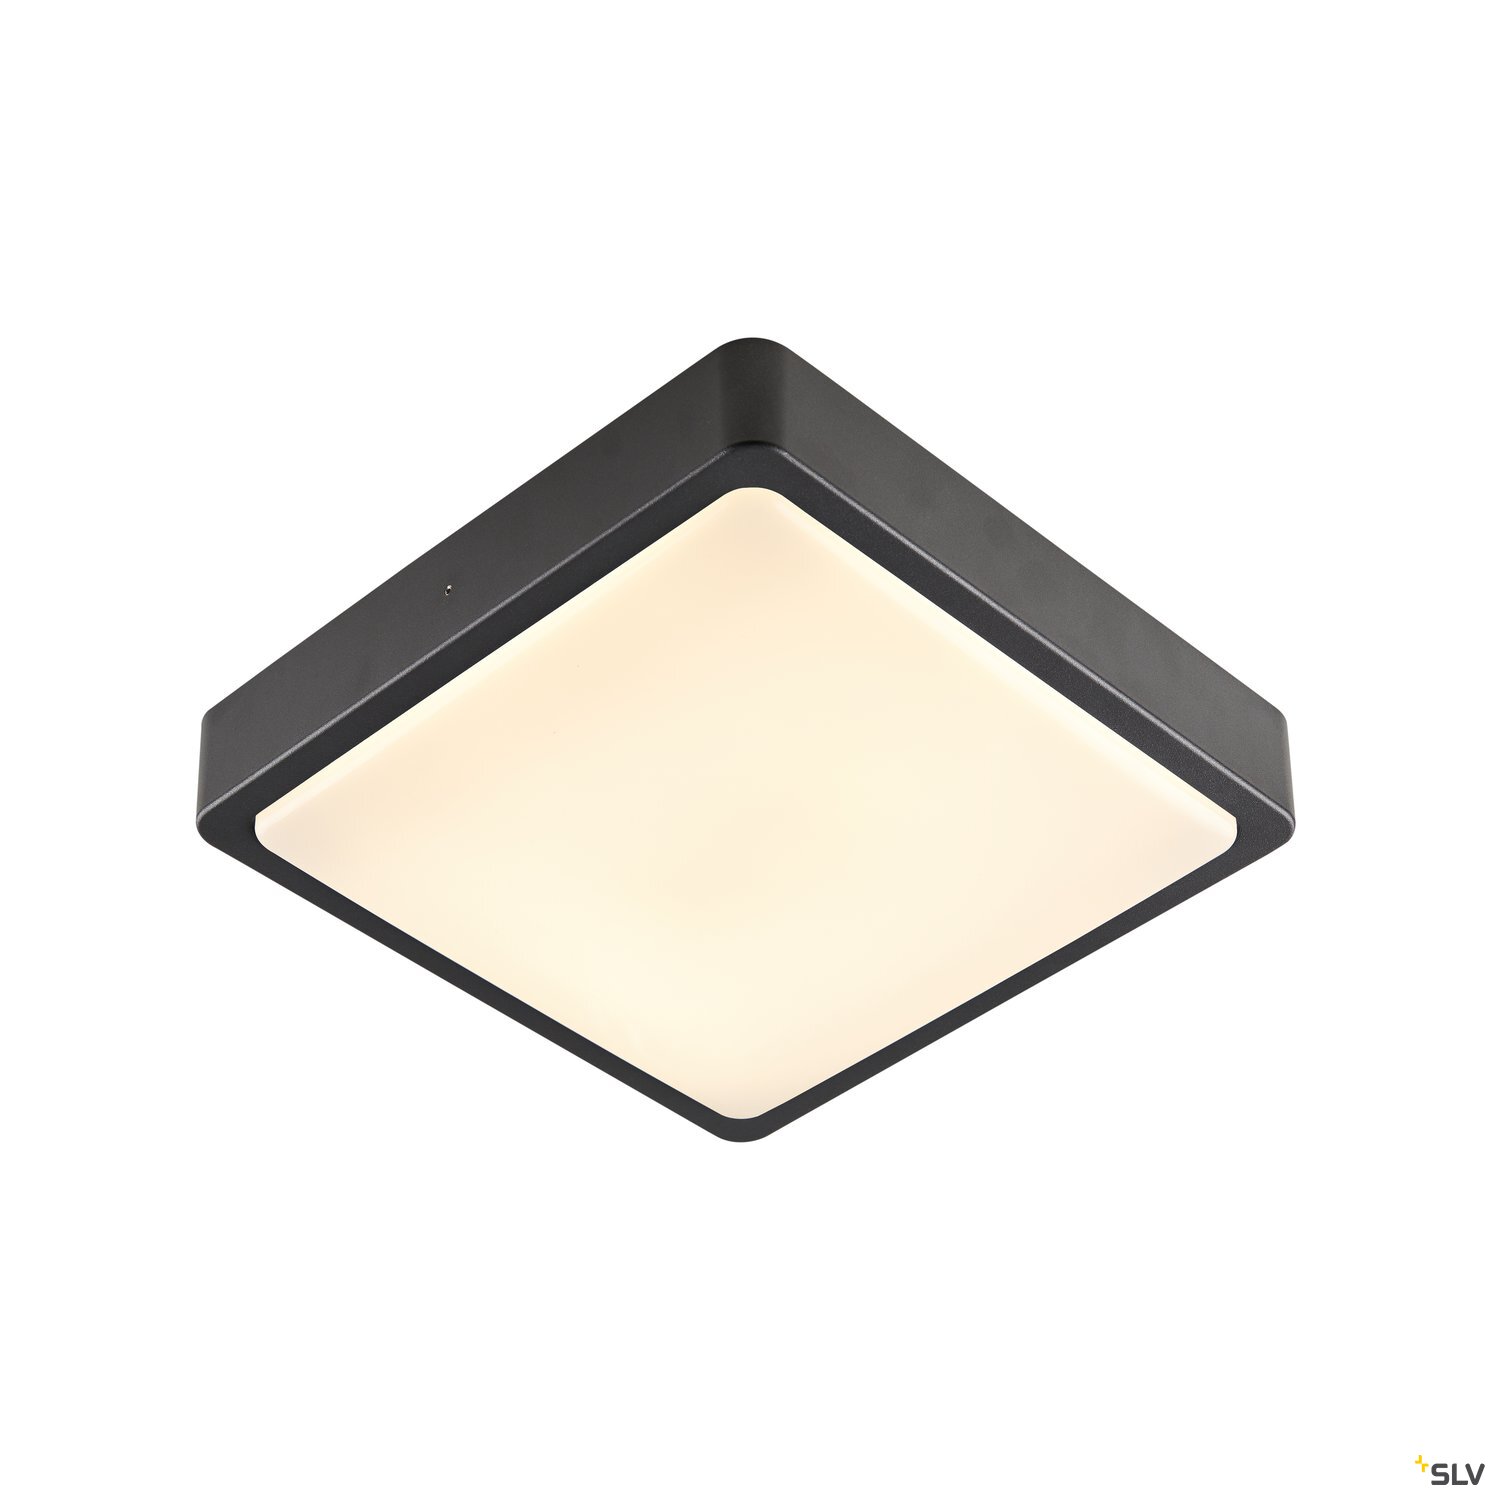 SLV LED Ceiling Light AINOS SQUARE, 3000/4000K, with Motion Detector, square, anthracite, IP65 1300lm